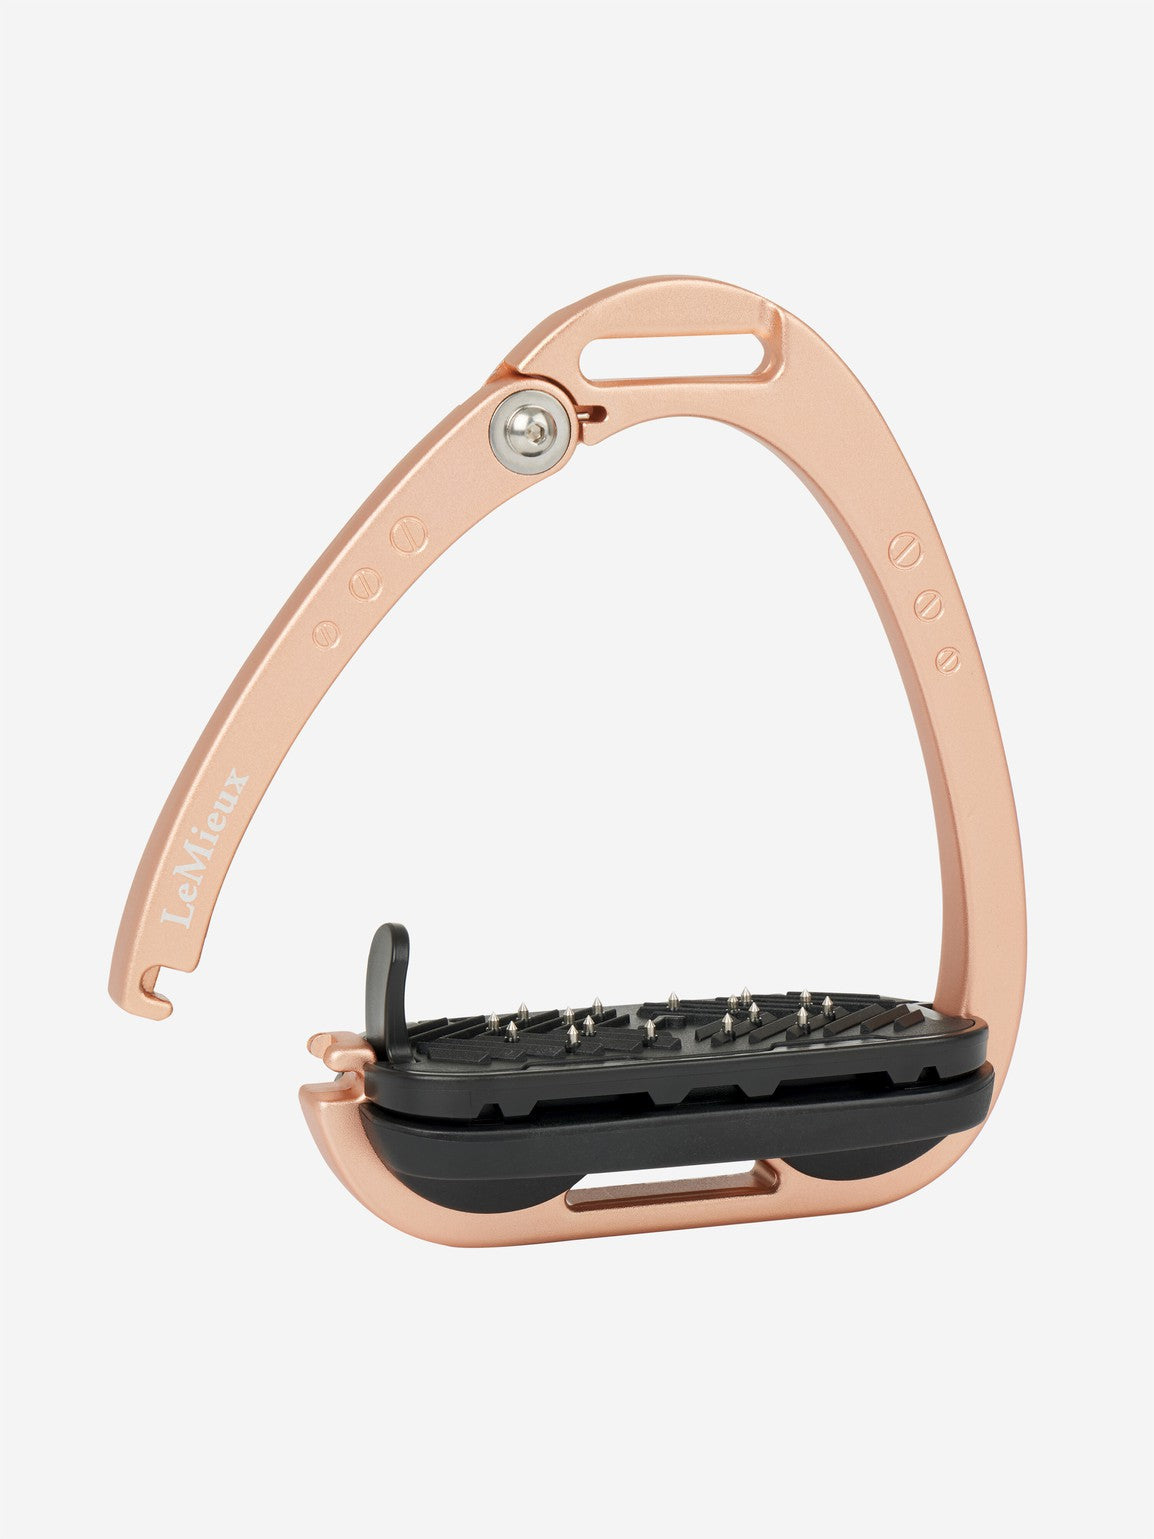 Rose gold-colored stirrup leathers with black footbed, isolated on white.